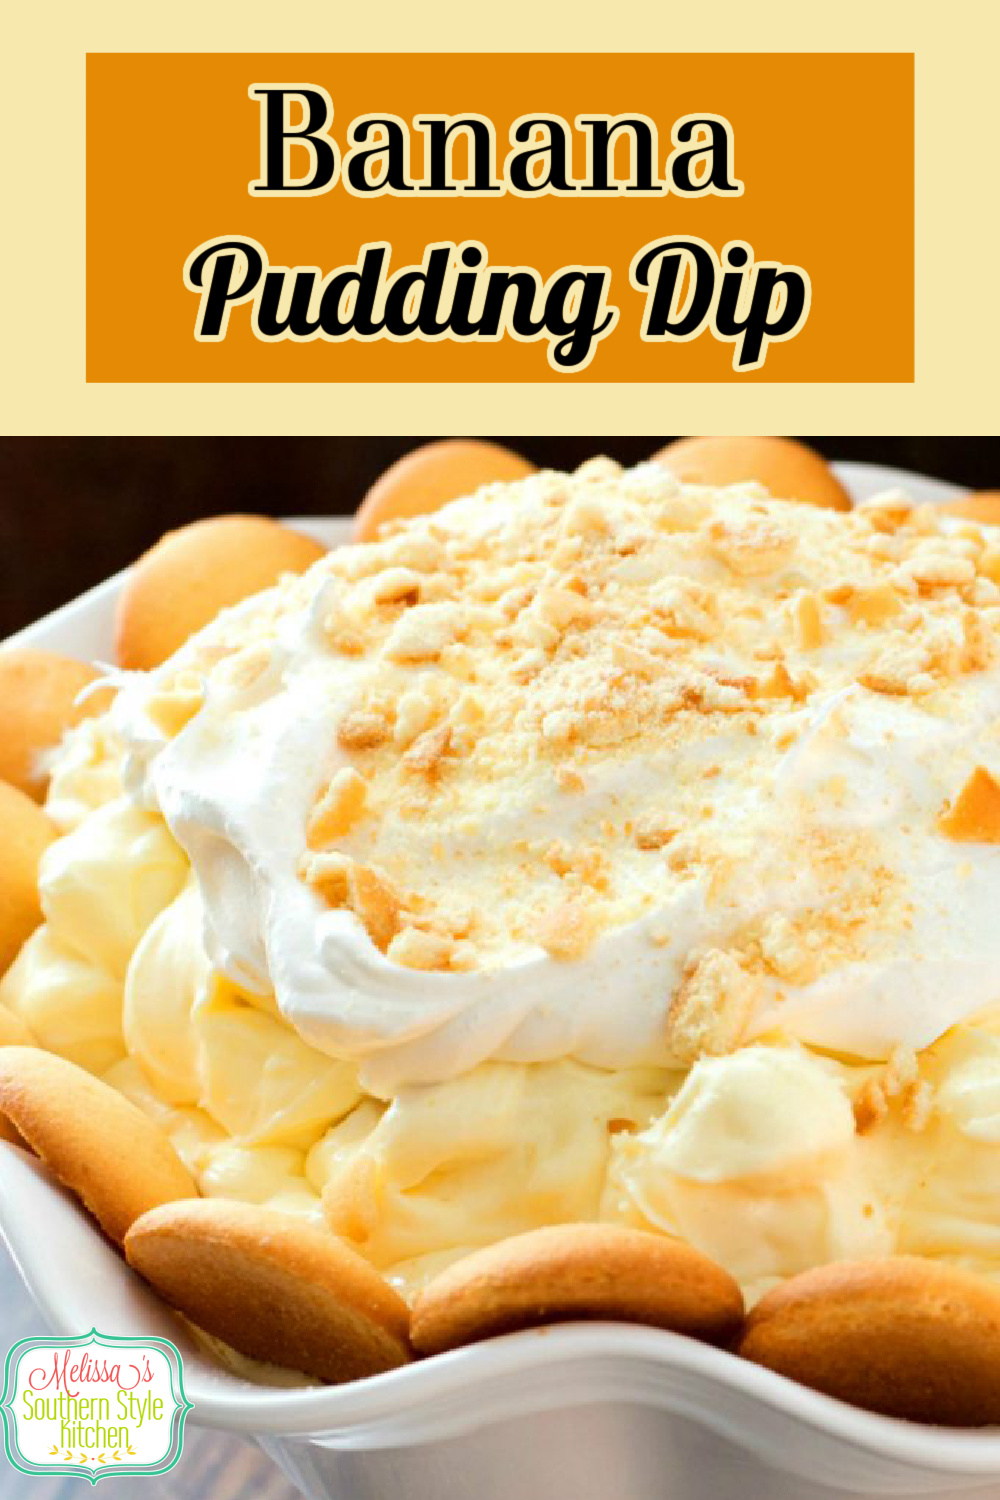 Banana pudding fan will flip for this dessert served with vanilla wafers for dipping! #bananapudding #bananas #pudding #diprecipes #bananapuddingdip #sweets #desserts #dessertfoodrecipes #easyrecipes #holidayrecipes #southernfood #southernrecipes